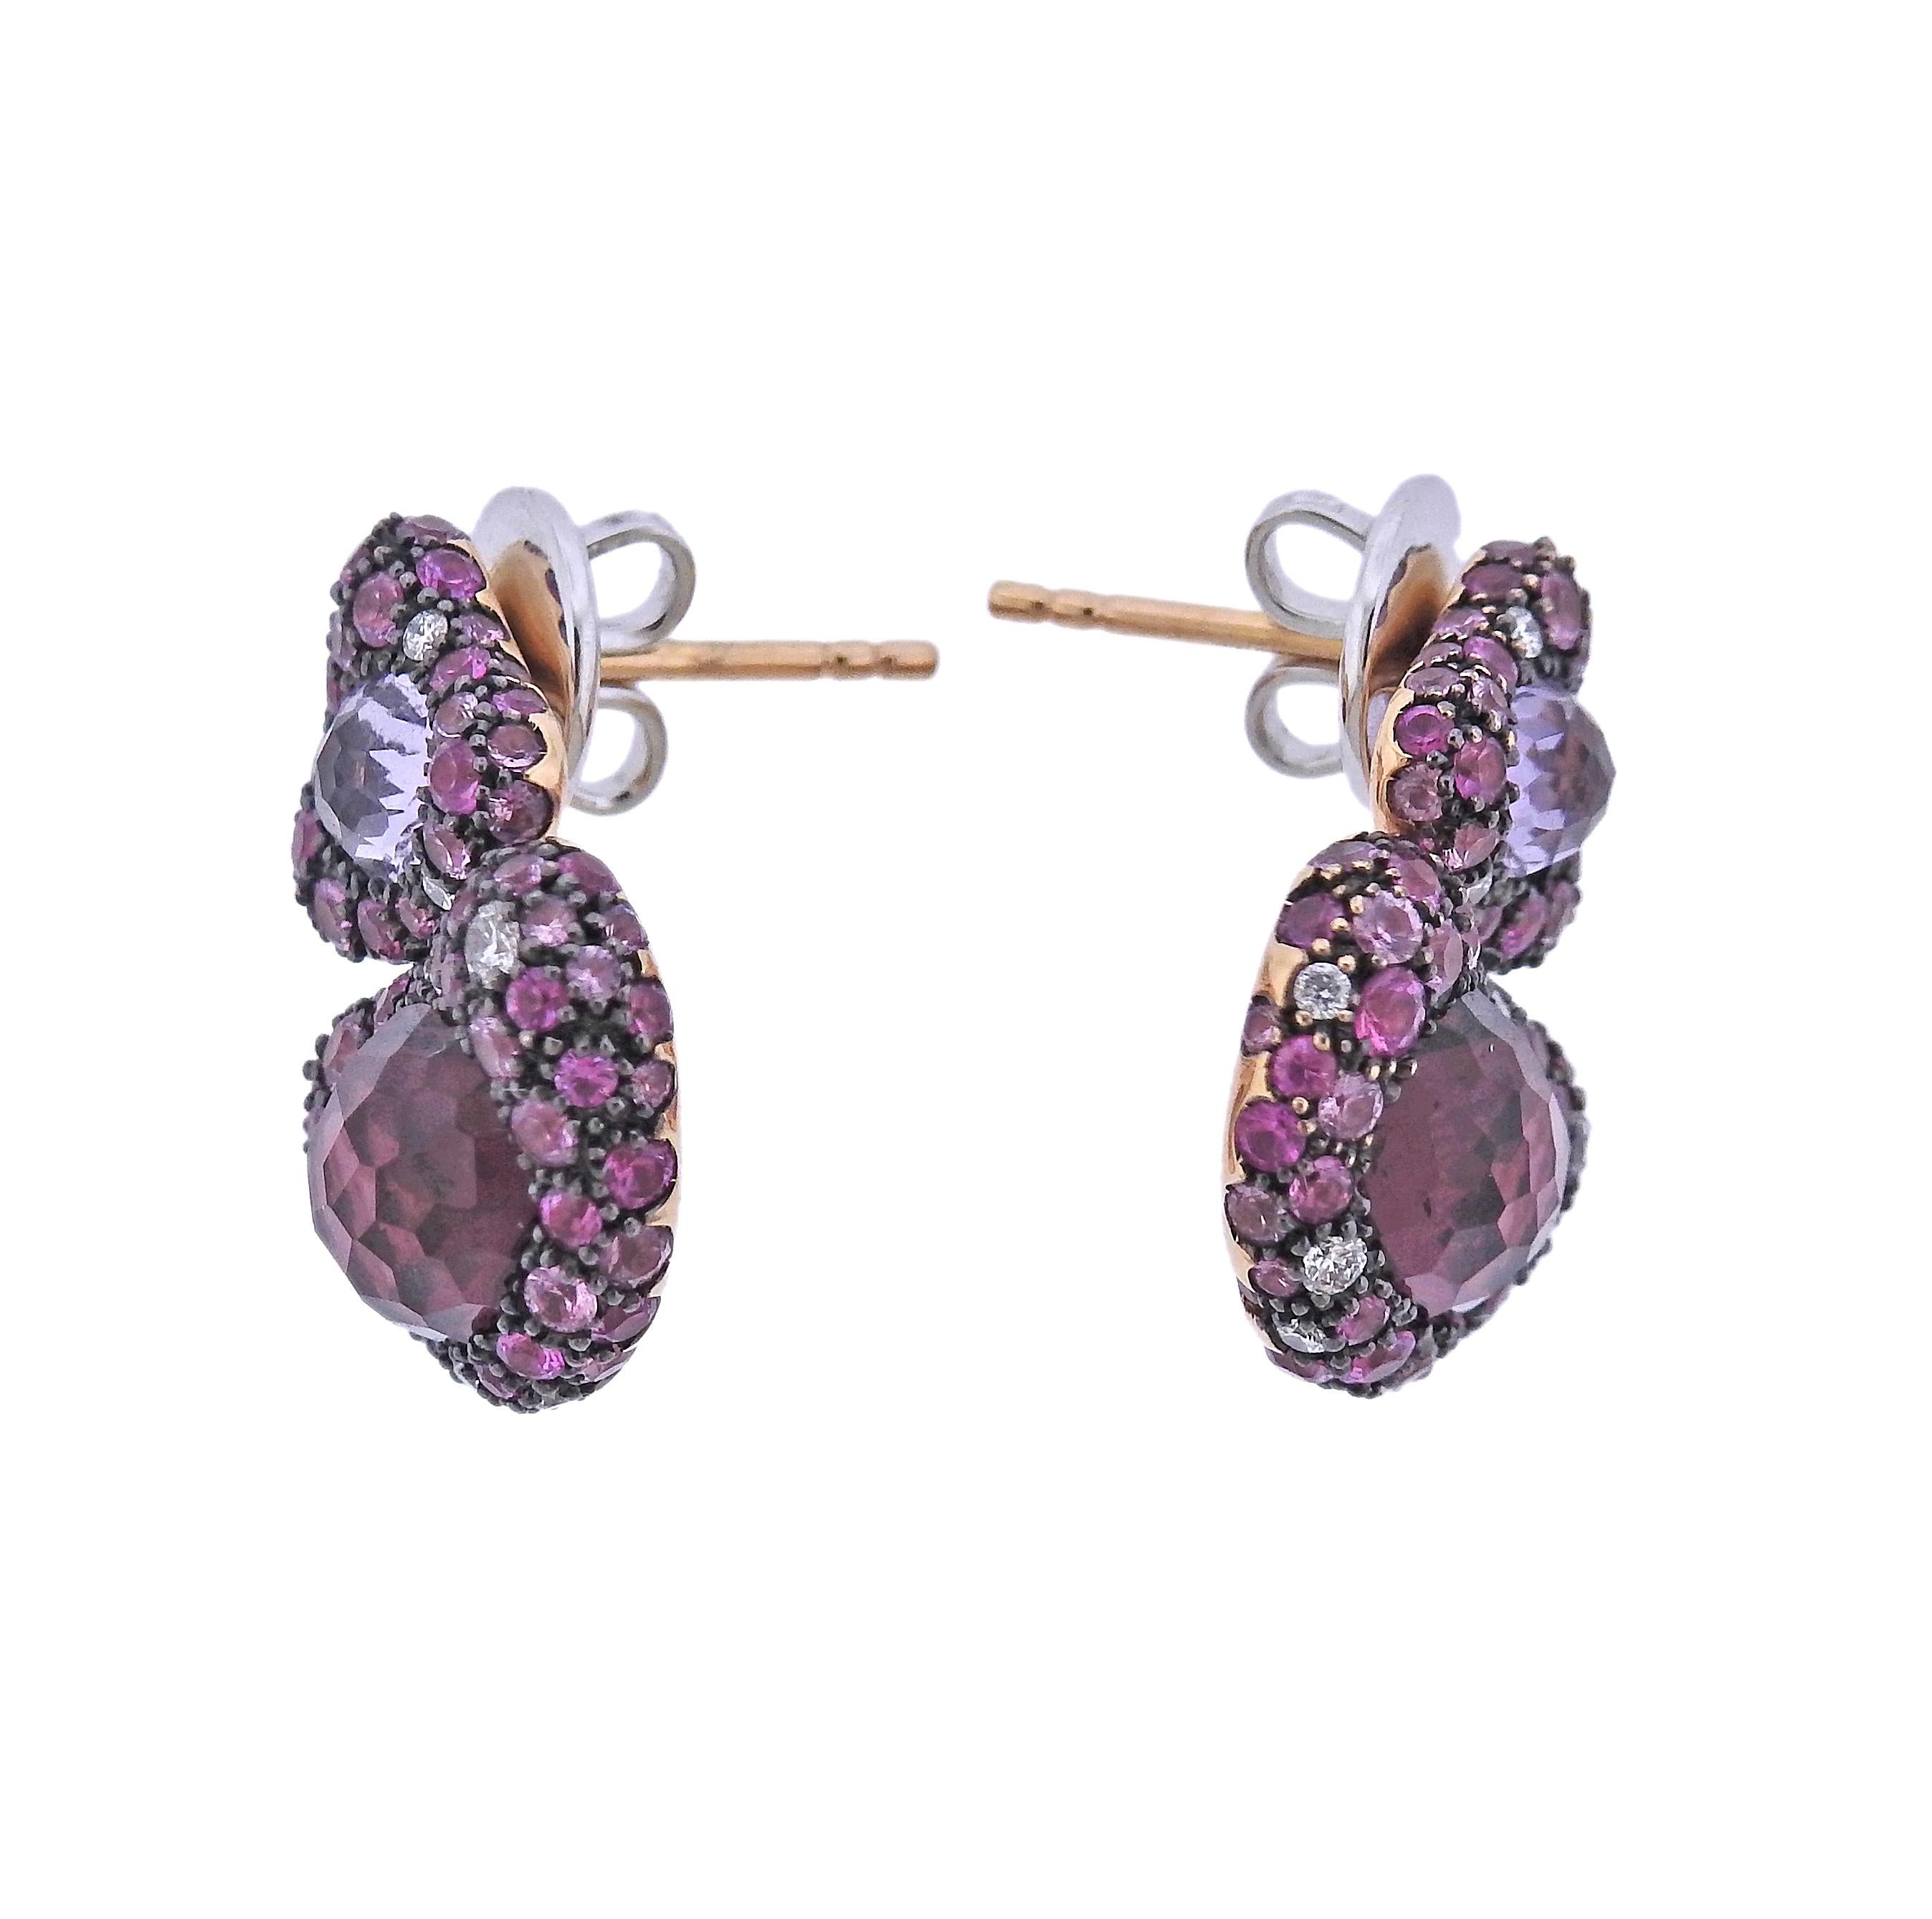 Brand new with tag Bucherer earrings, 18k gold, with 0.21ctw Si/H diamonds, 4.65ctw rhodolite, 1.00ctw amethyst and 3.19ctw sapphires.  Retail $5380. Comes with box. Earrings are 21mm x 17mm. Weight - 13.6 grams. Marked: CB 750.